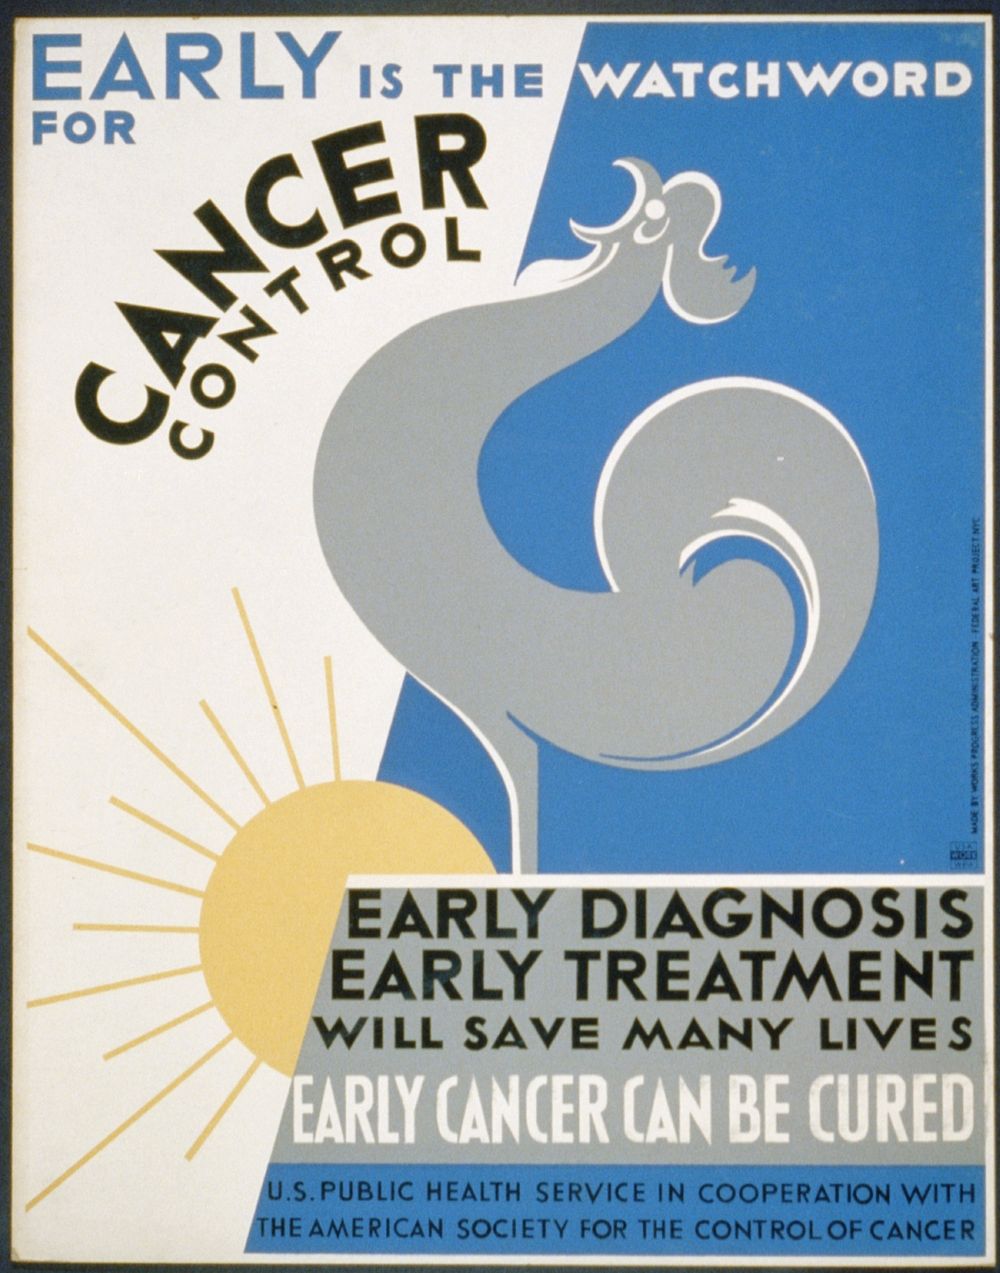 Early is the watchword for cancer control Early diagnosis, early treatment will save many lives : Early cancer can be cured.